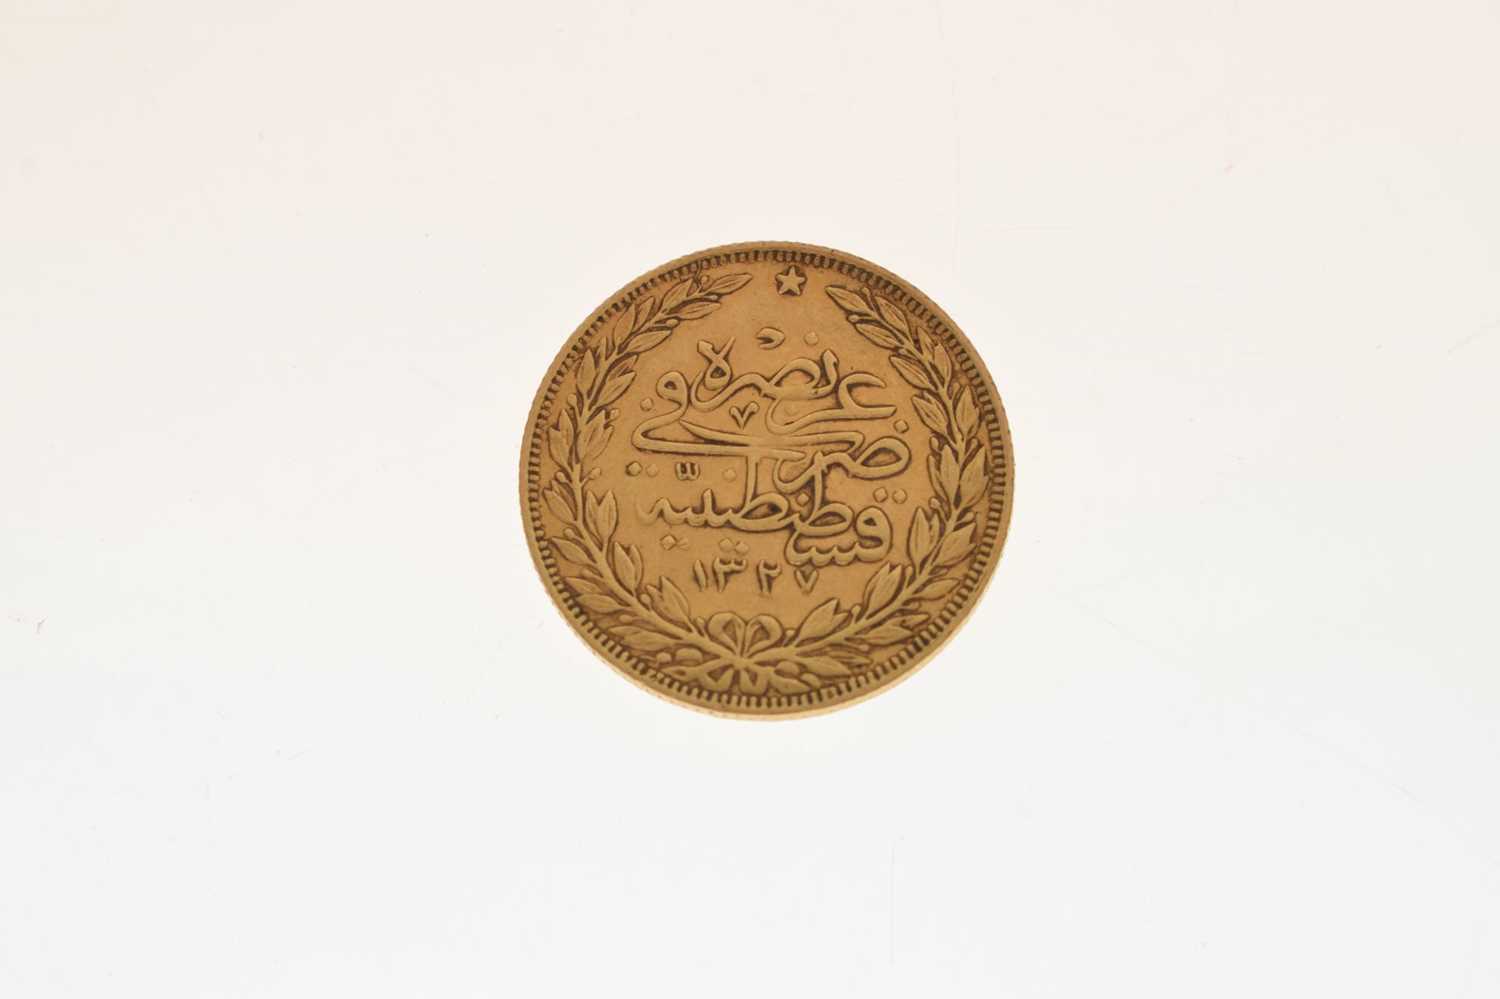 Turkey - 100 Piastres gold coin - Image 5 of 5